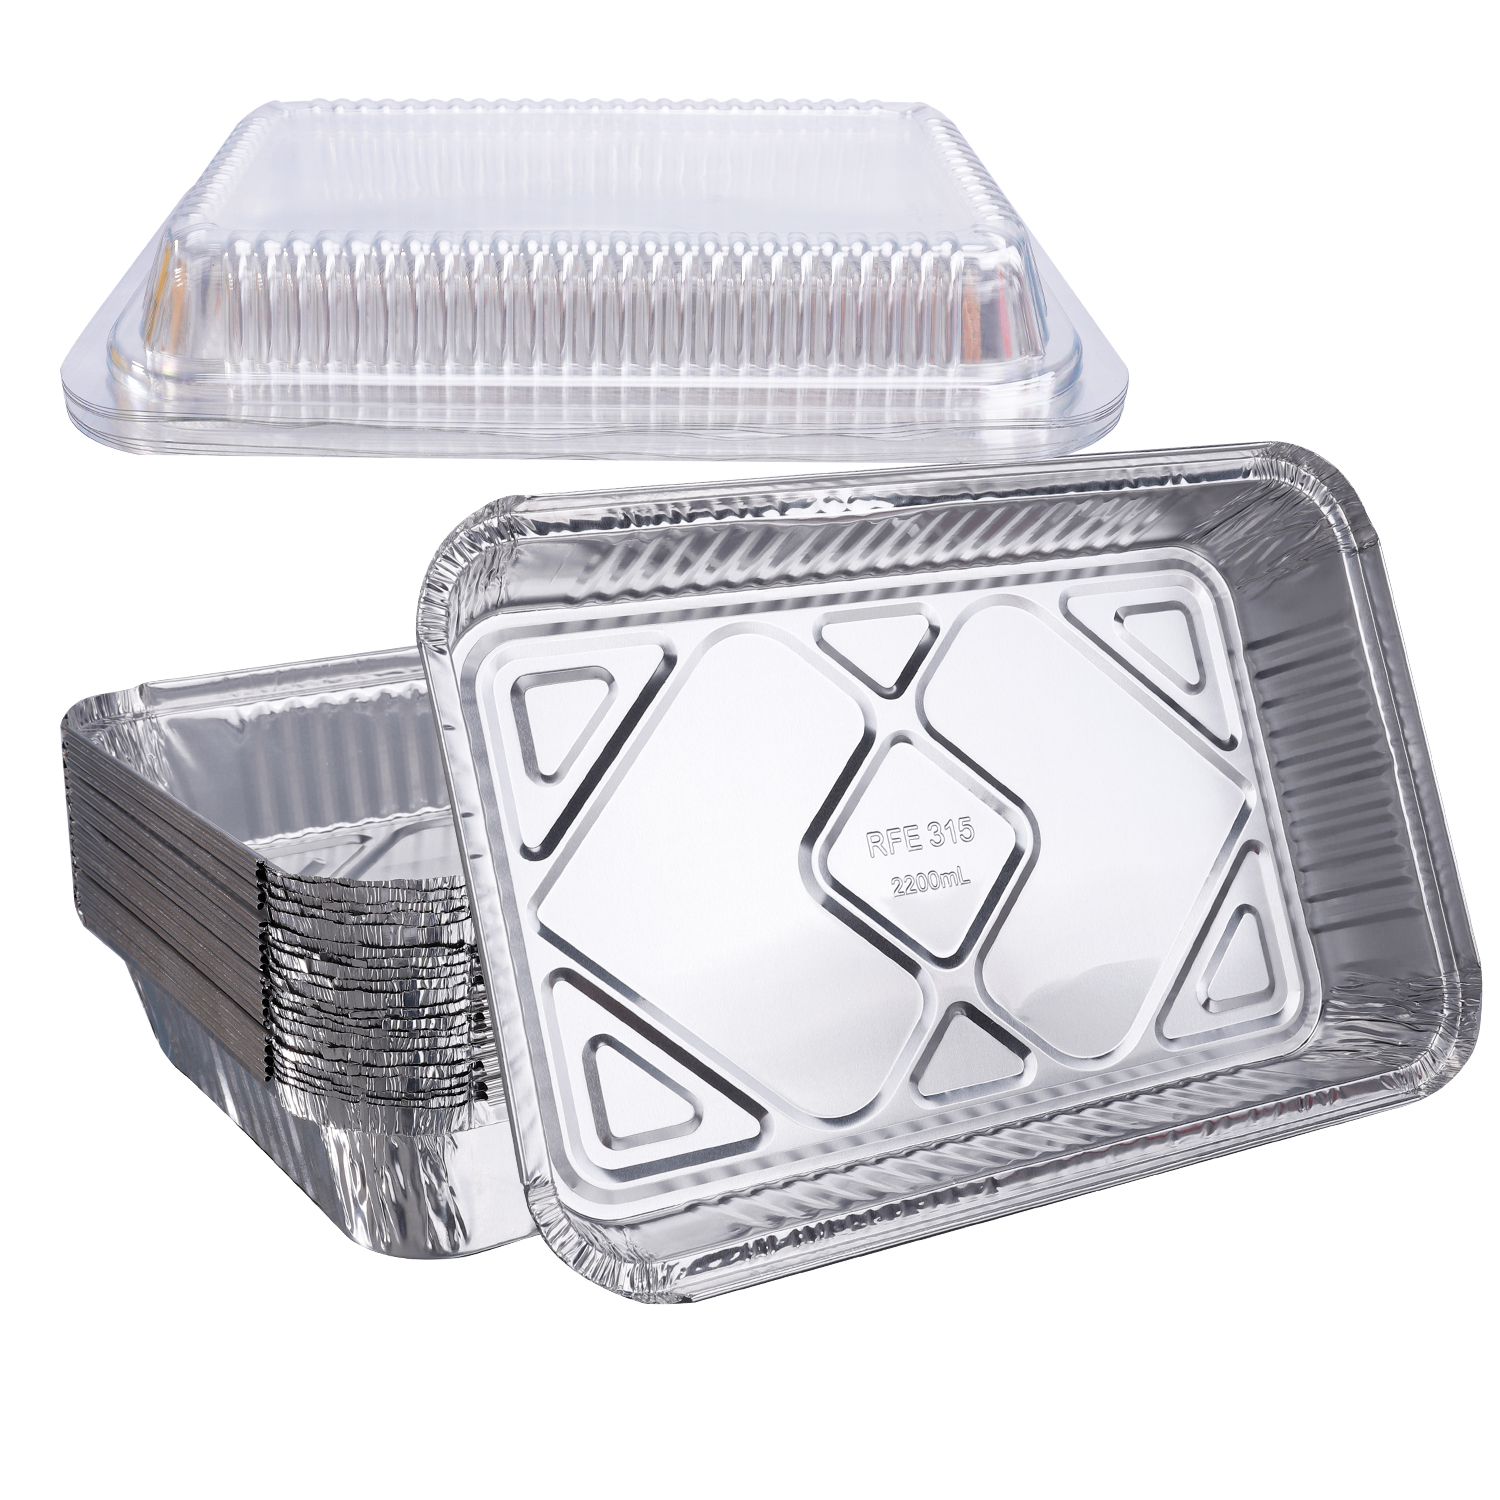 Saver's Selection Disposable Aluminum Foil Food Trays Container